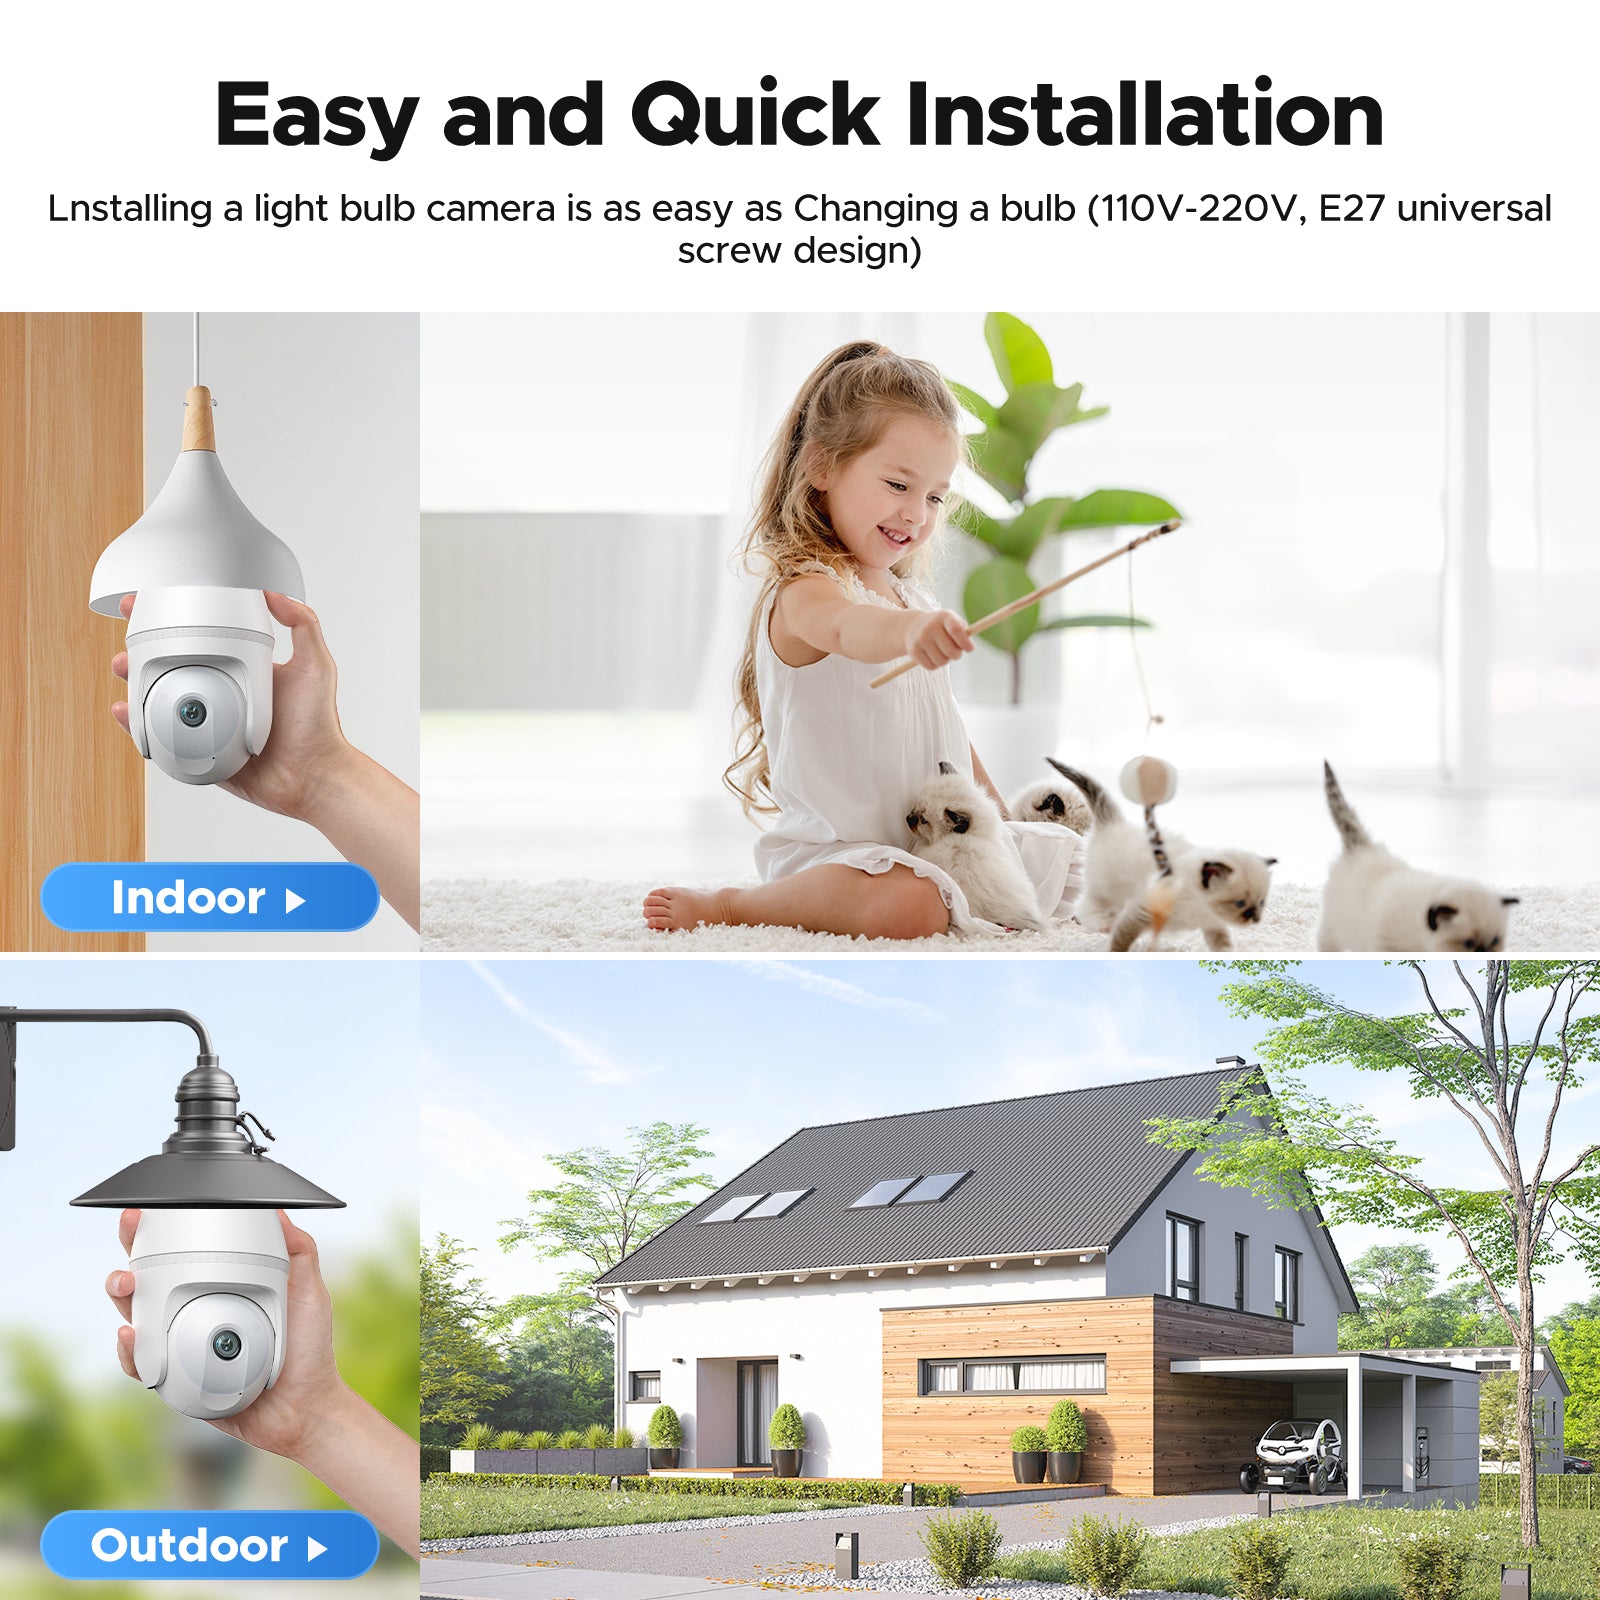 Toguard SC47 1080P 2MP WiFi Security Camera for Home Outdoor Bulb Camera Support 2.4G/5G WiFi, Motion Detection and Siren Alarm